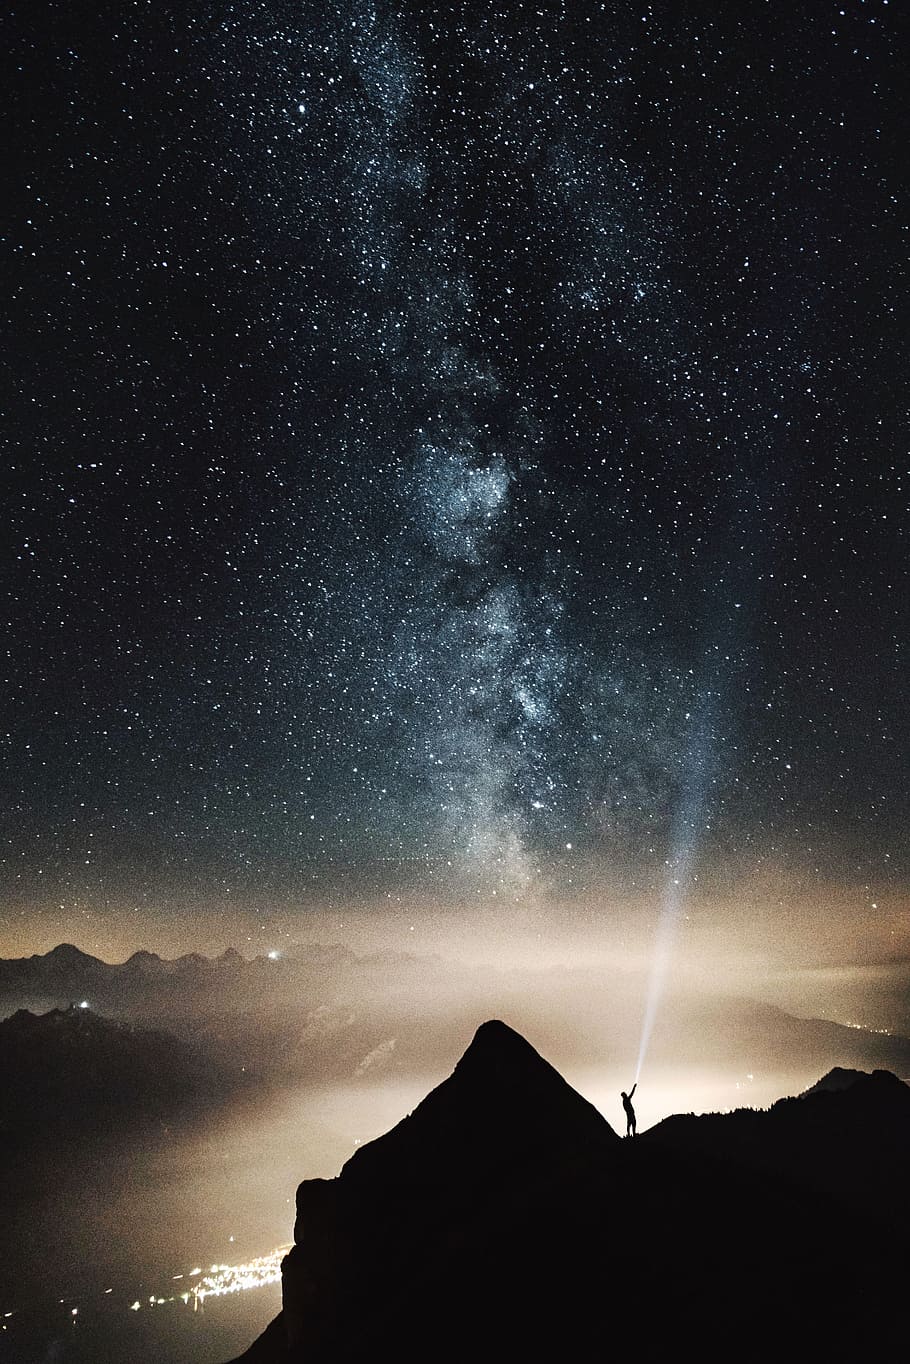 silhouette of person on top of mountain pointing flashlight on sky filled with stars at night time, person holding flashlight on mountain